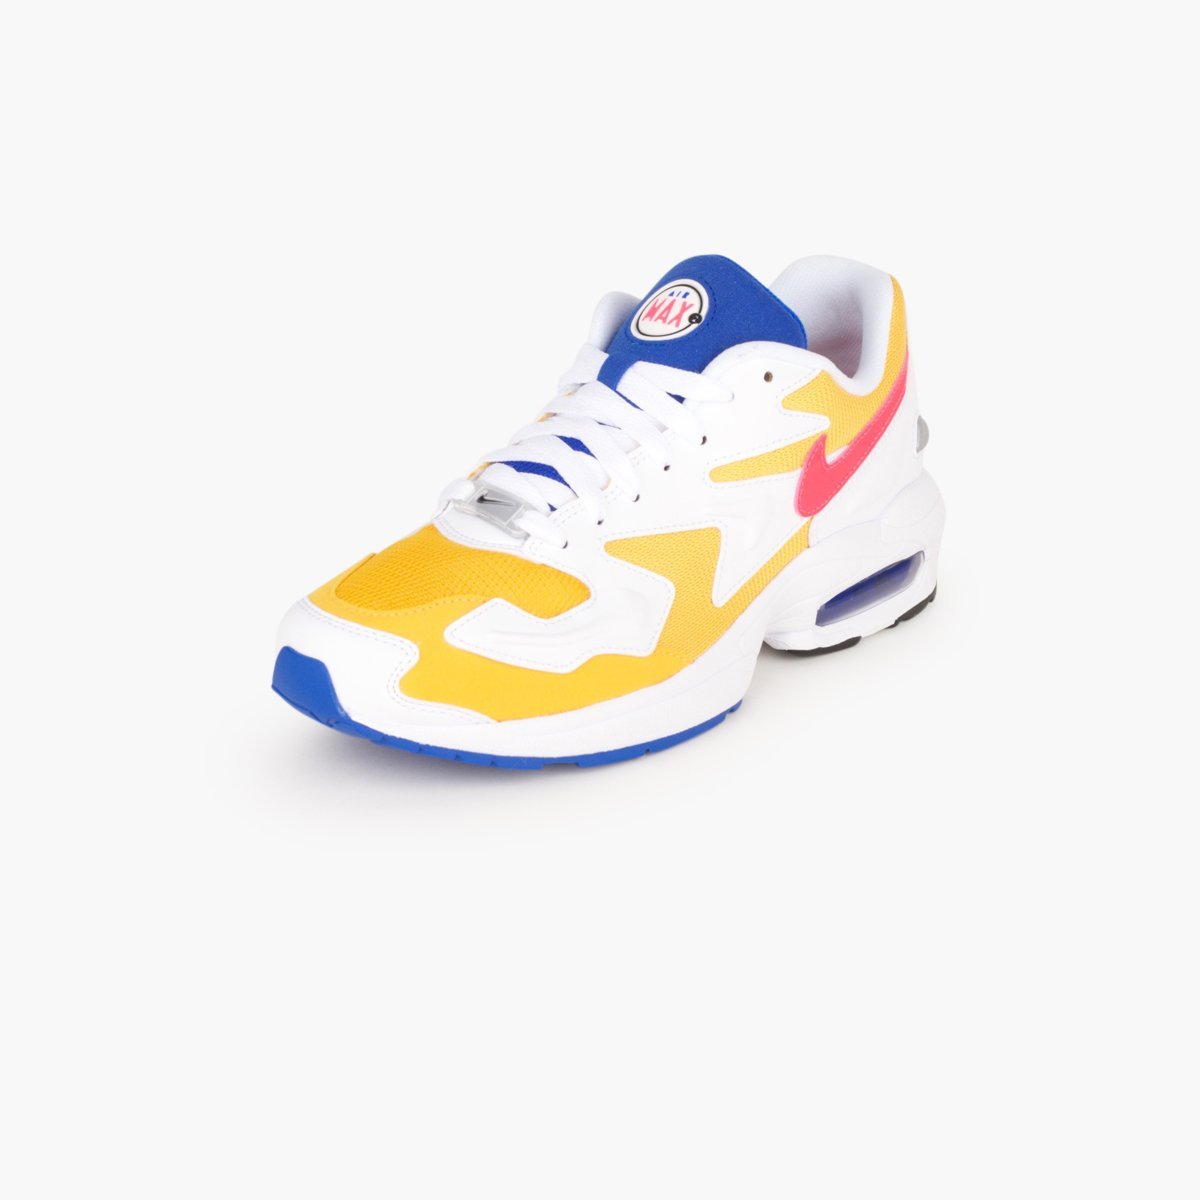 Nike Air Max2 Light-AO1741-700-gold-9 us-SUEDE Store